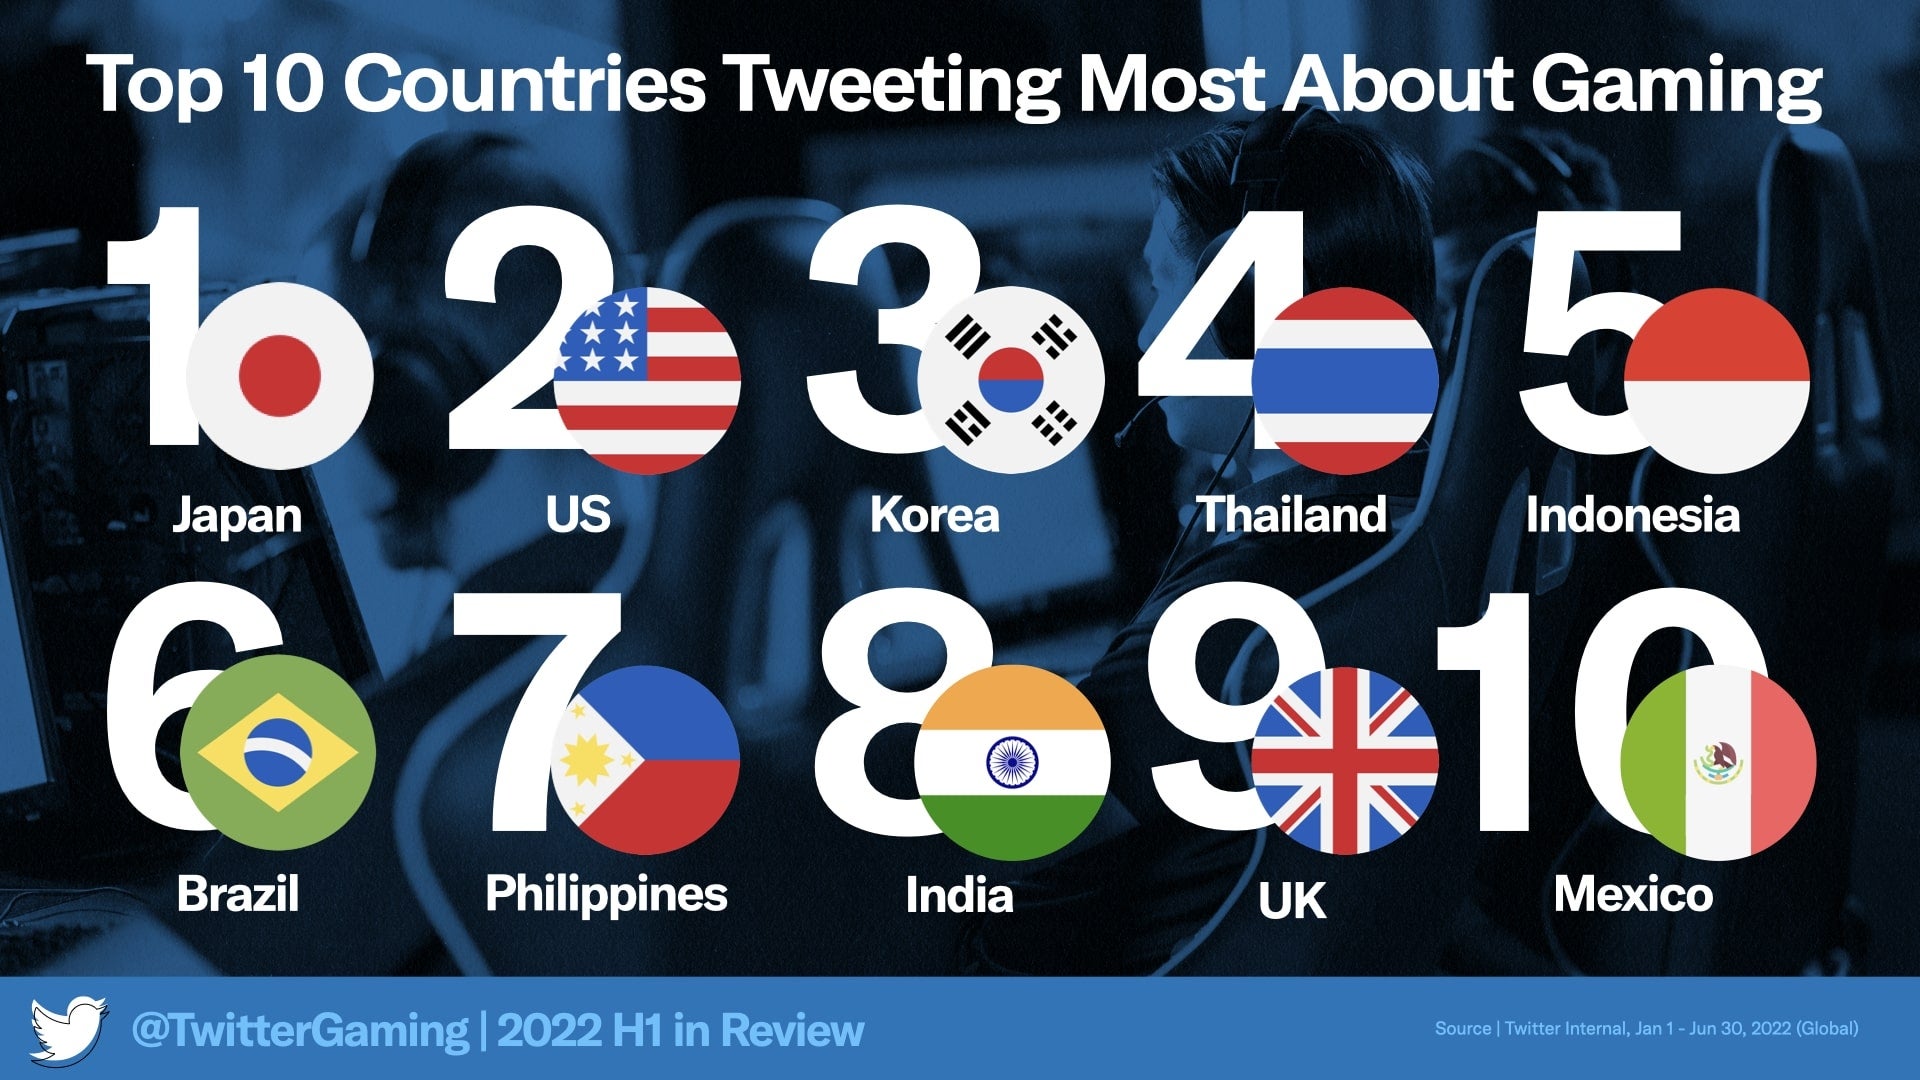 An infographic detailing the countries that tweeted the most about games during the first half of 2022.